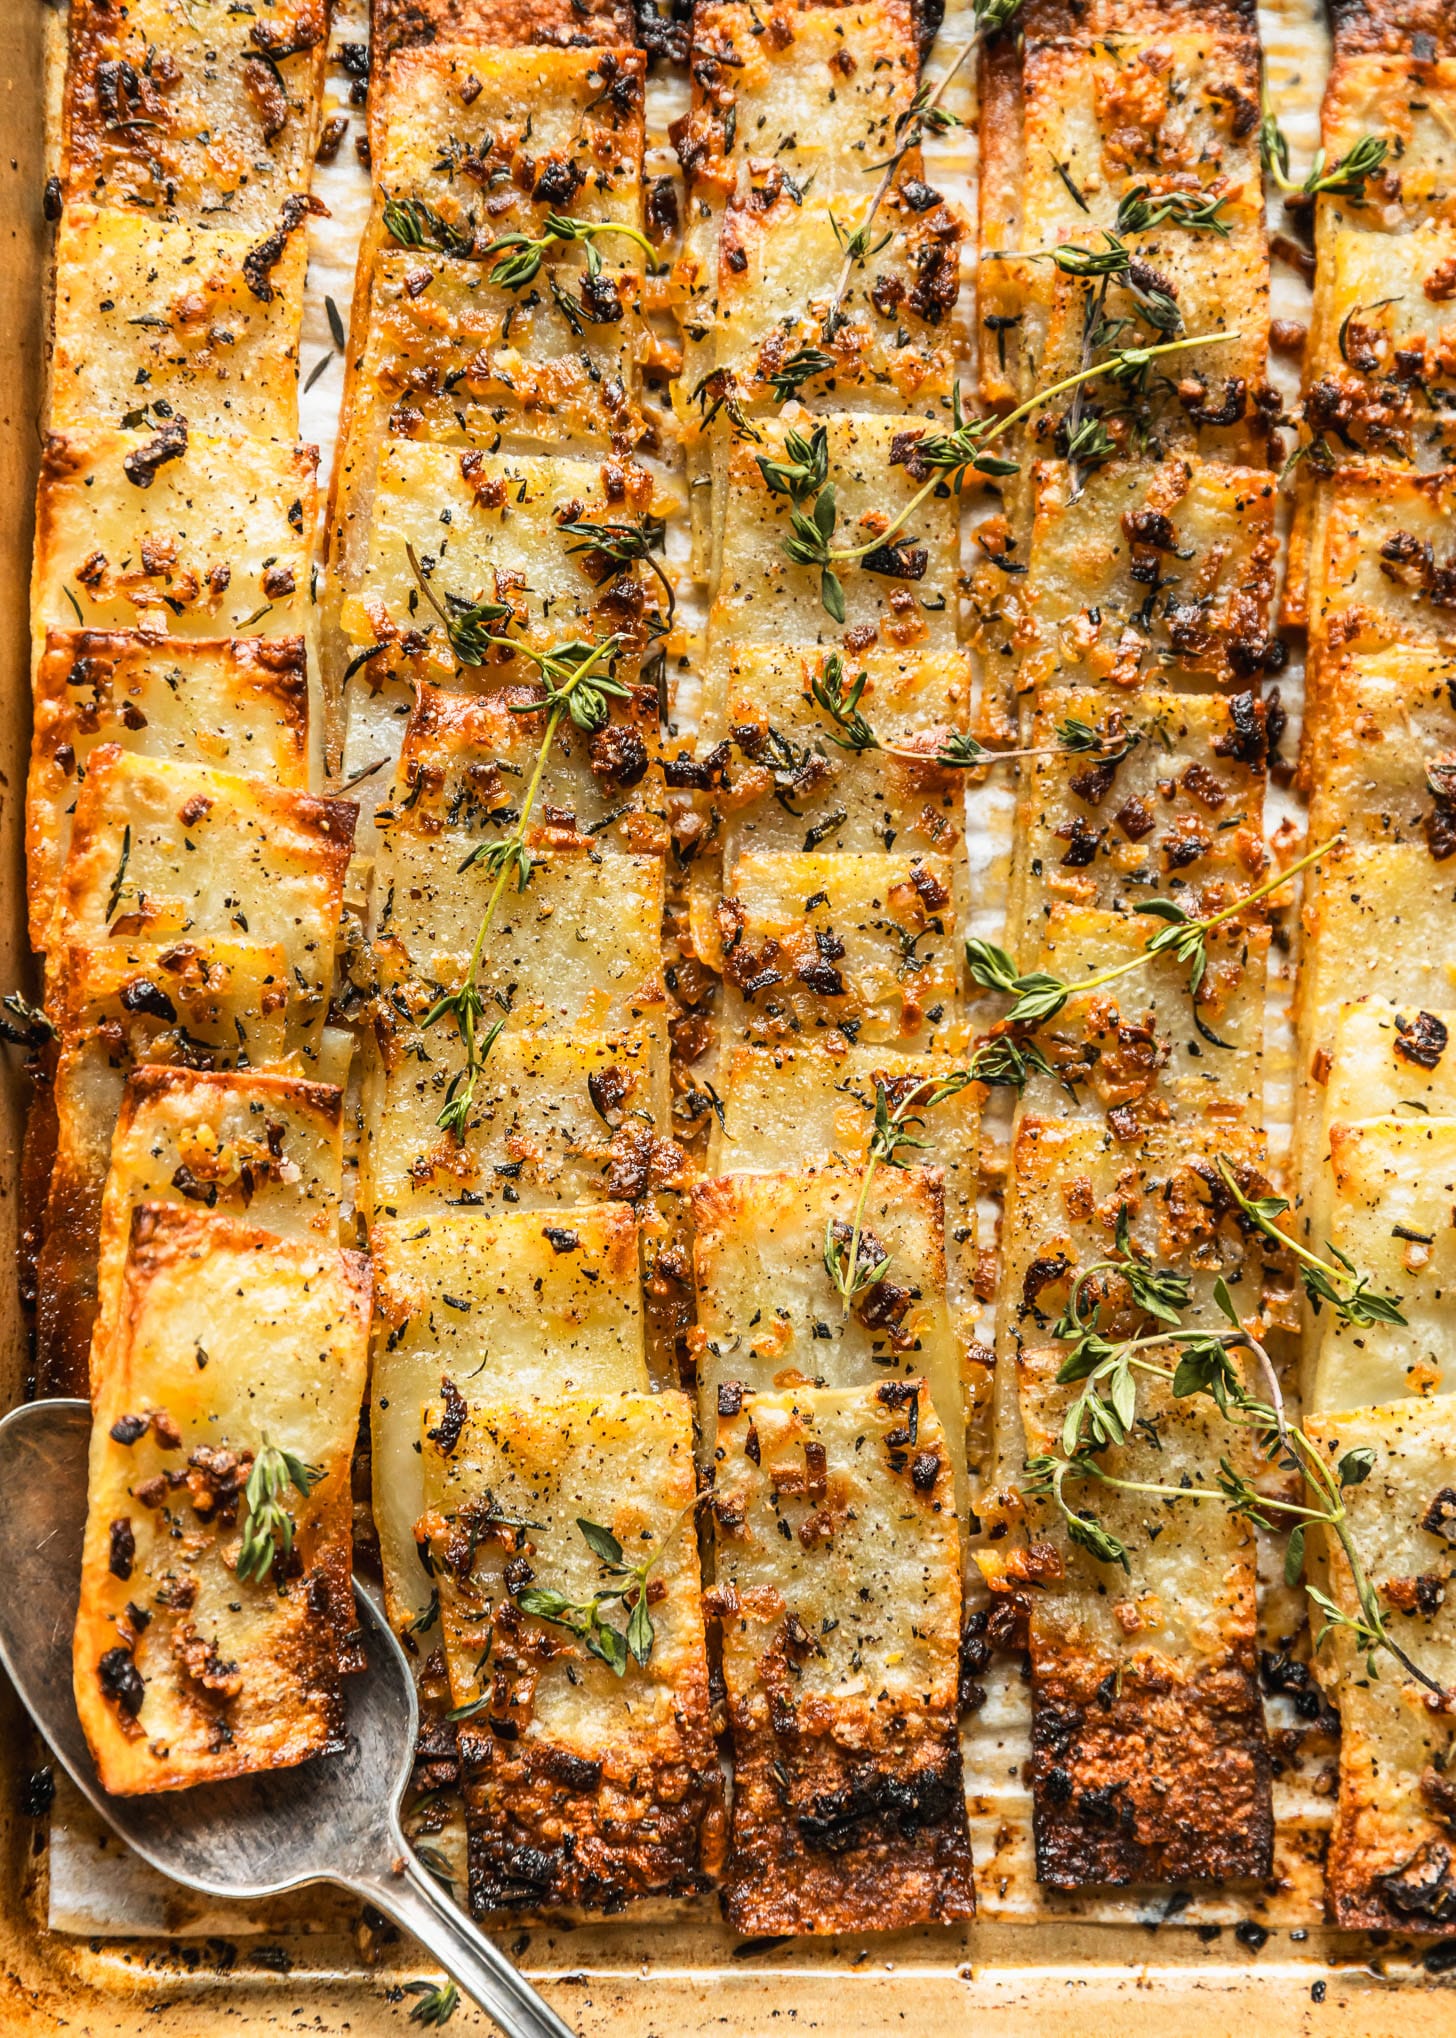 Domino potatoes with shallots, rosemary, and fresh time on a gold sheet pan.